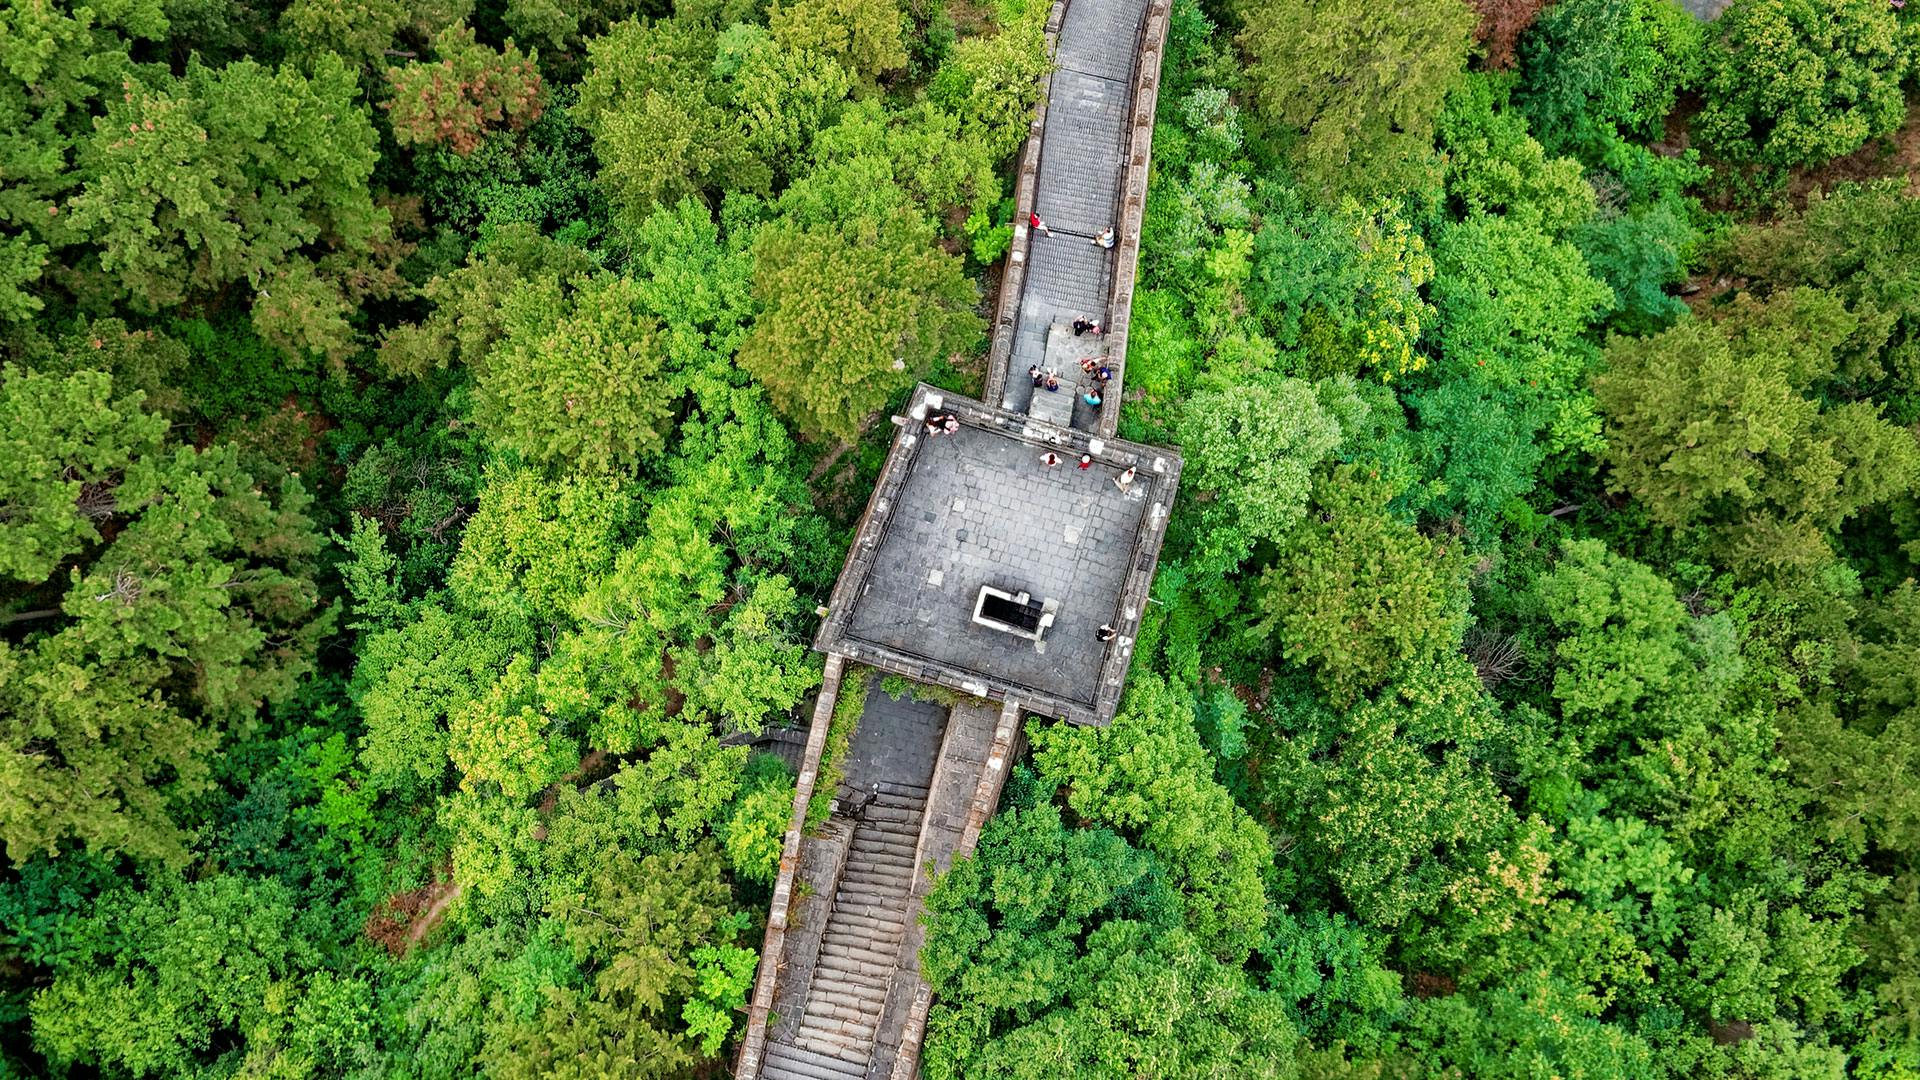 A view of a tower on the Great Wall of China from above. It's surrounded by a forest.